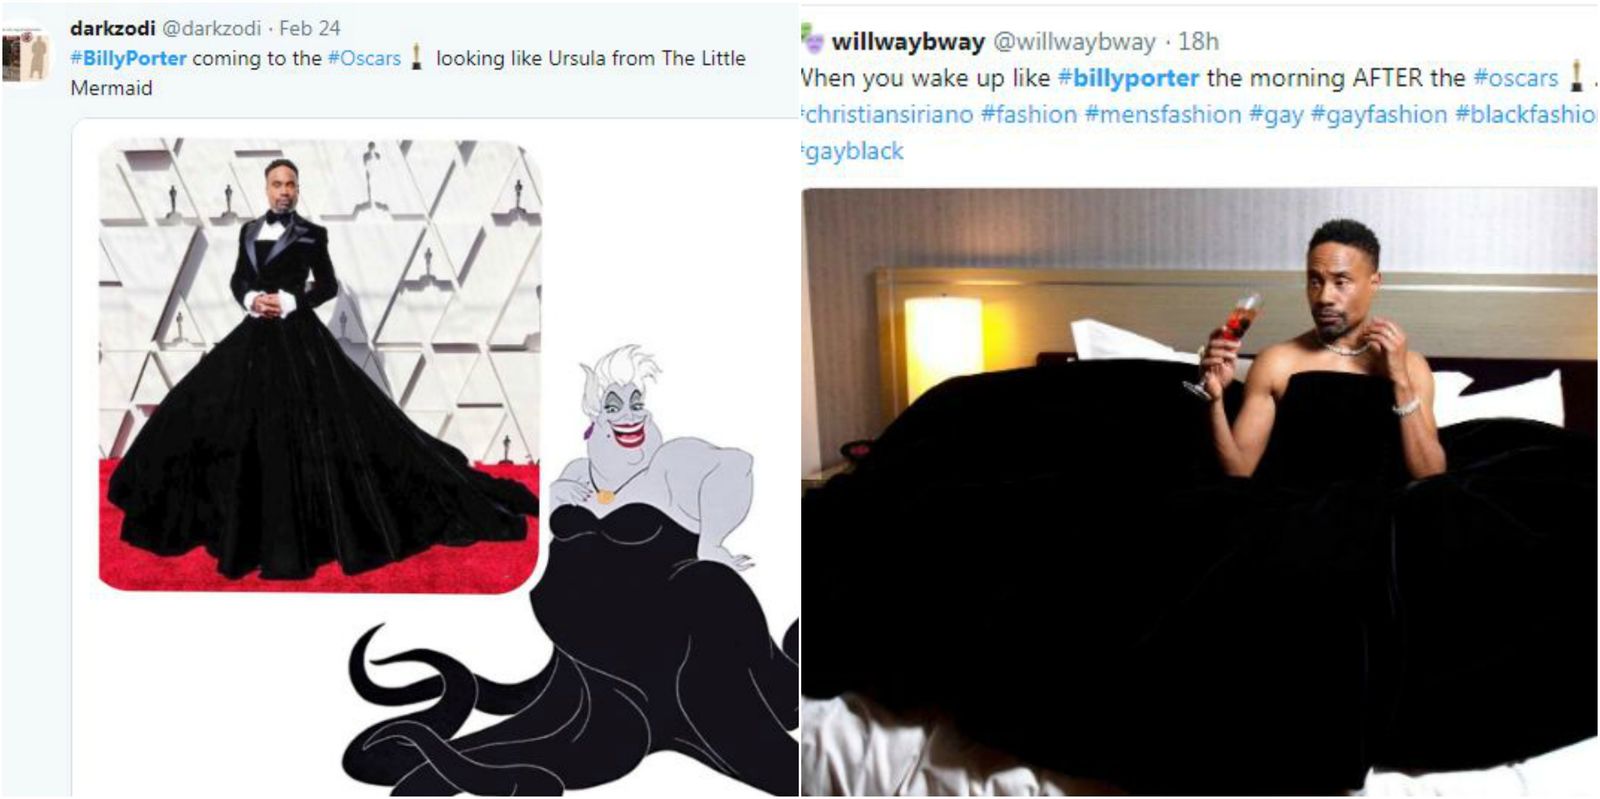 Billy Porter’s Tuxedo Gown at The Oscars 2019 Not Only Inspired Fashion But Also Hilarious Twitter Memes